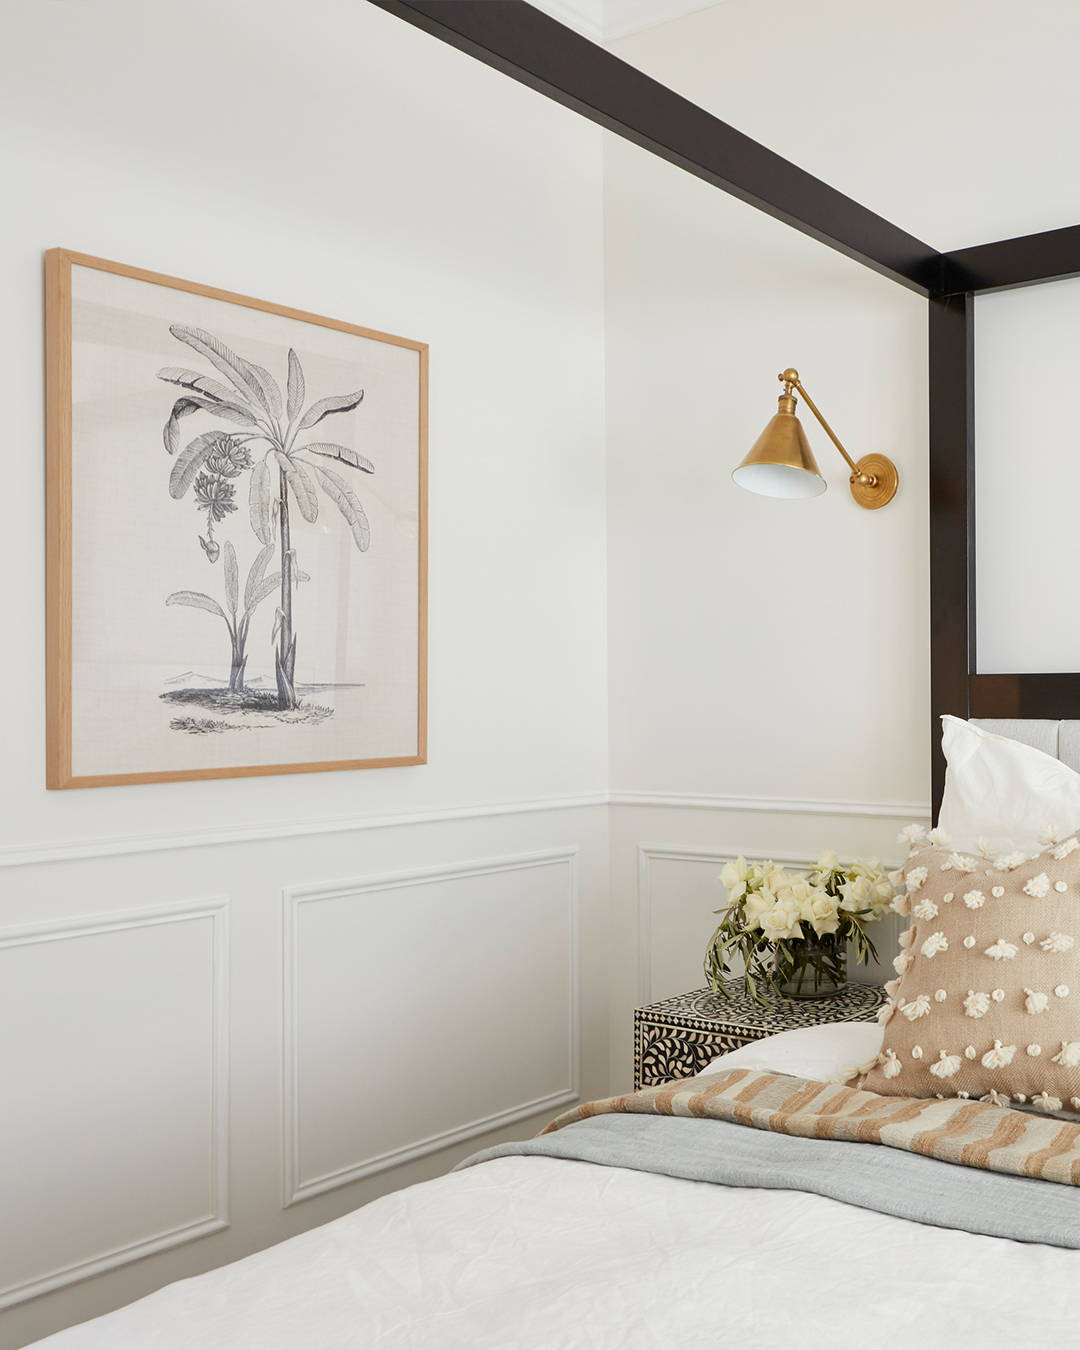 A framed artwork featuring a palm illustration hangs on the wall of this bedroom setting